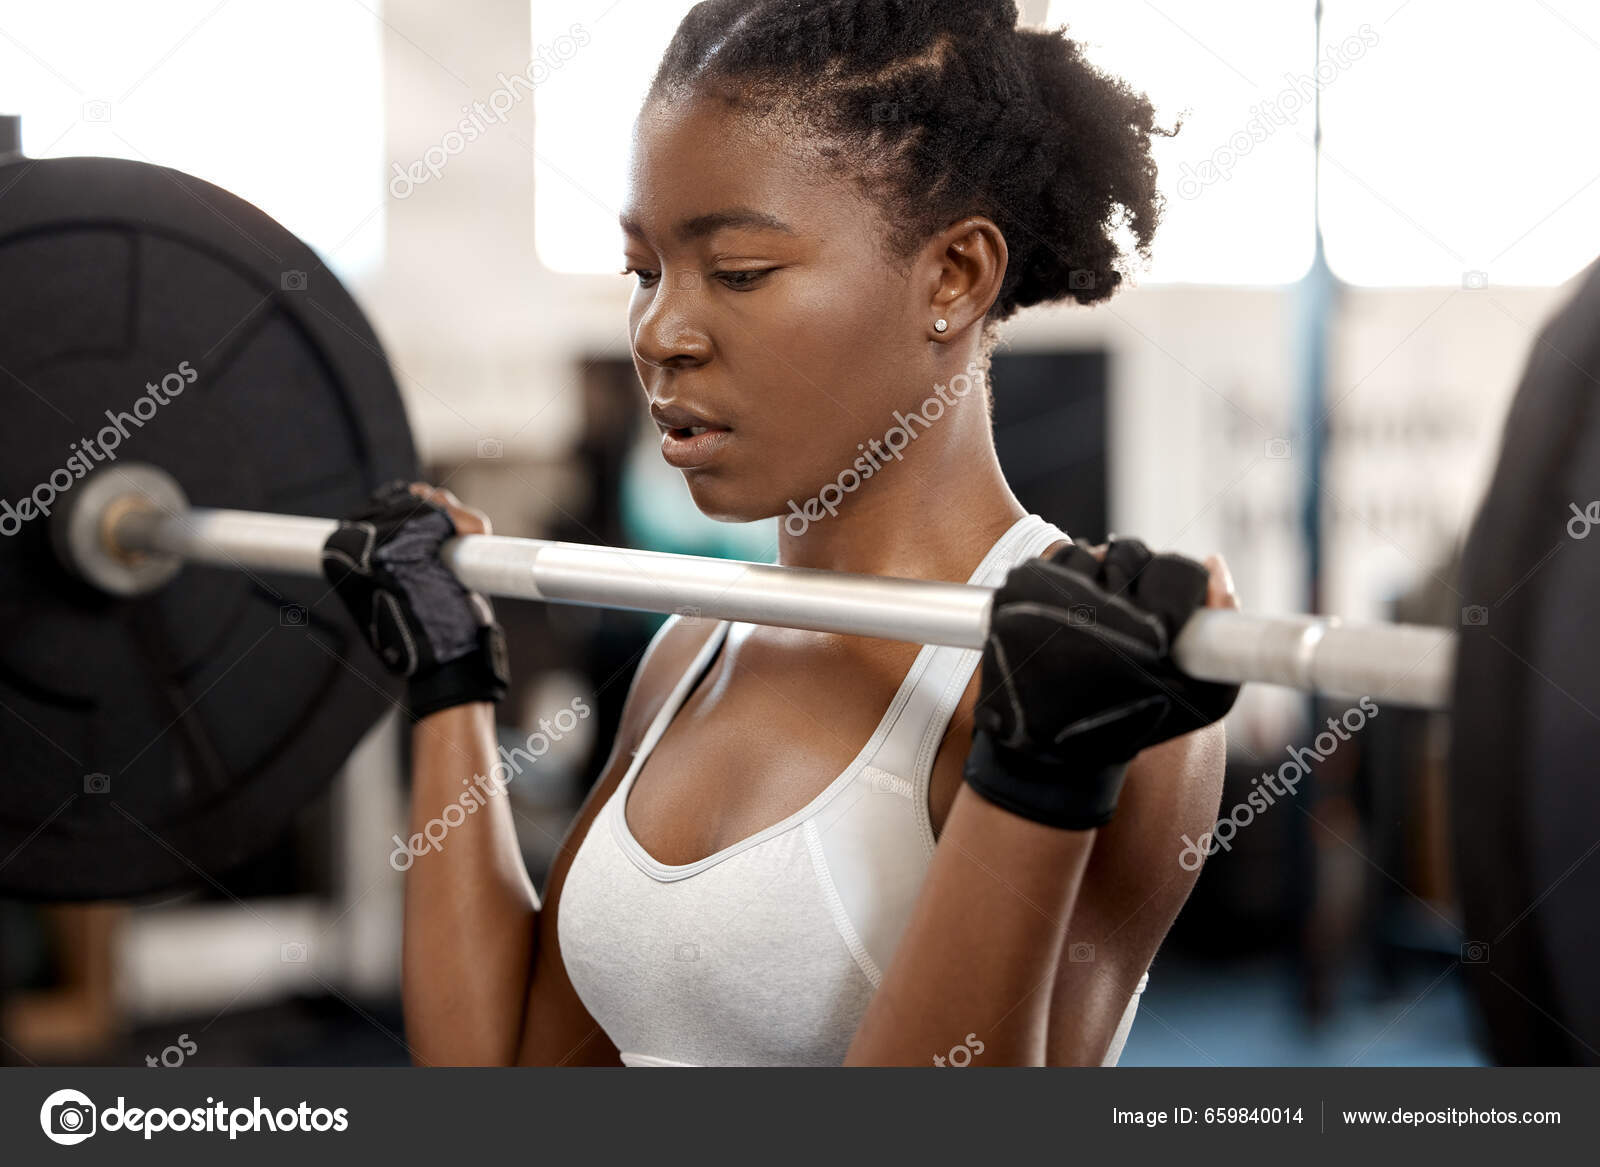 Woman Trains Pecs in the Gym Stock Image - Image of girl, energy